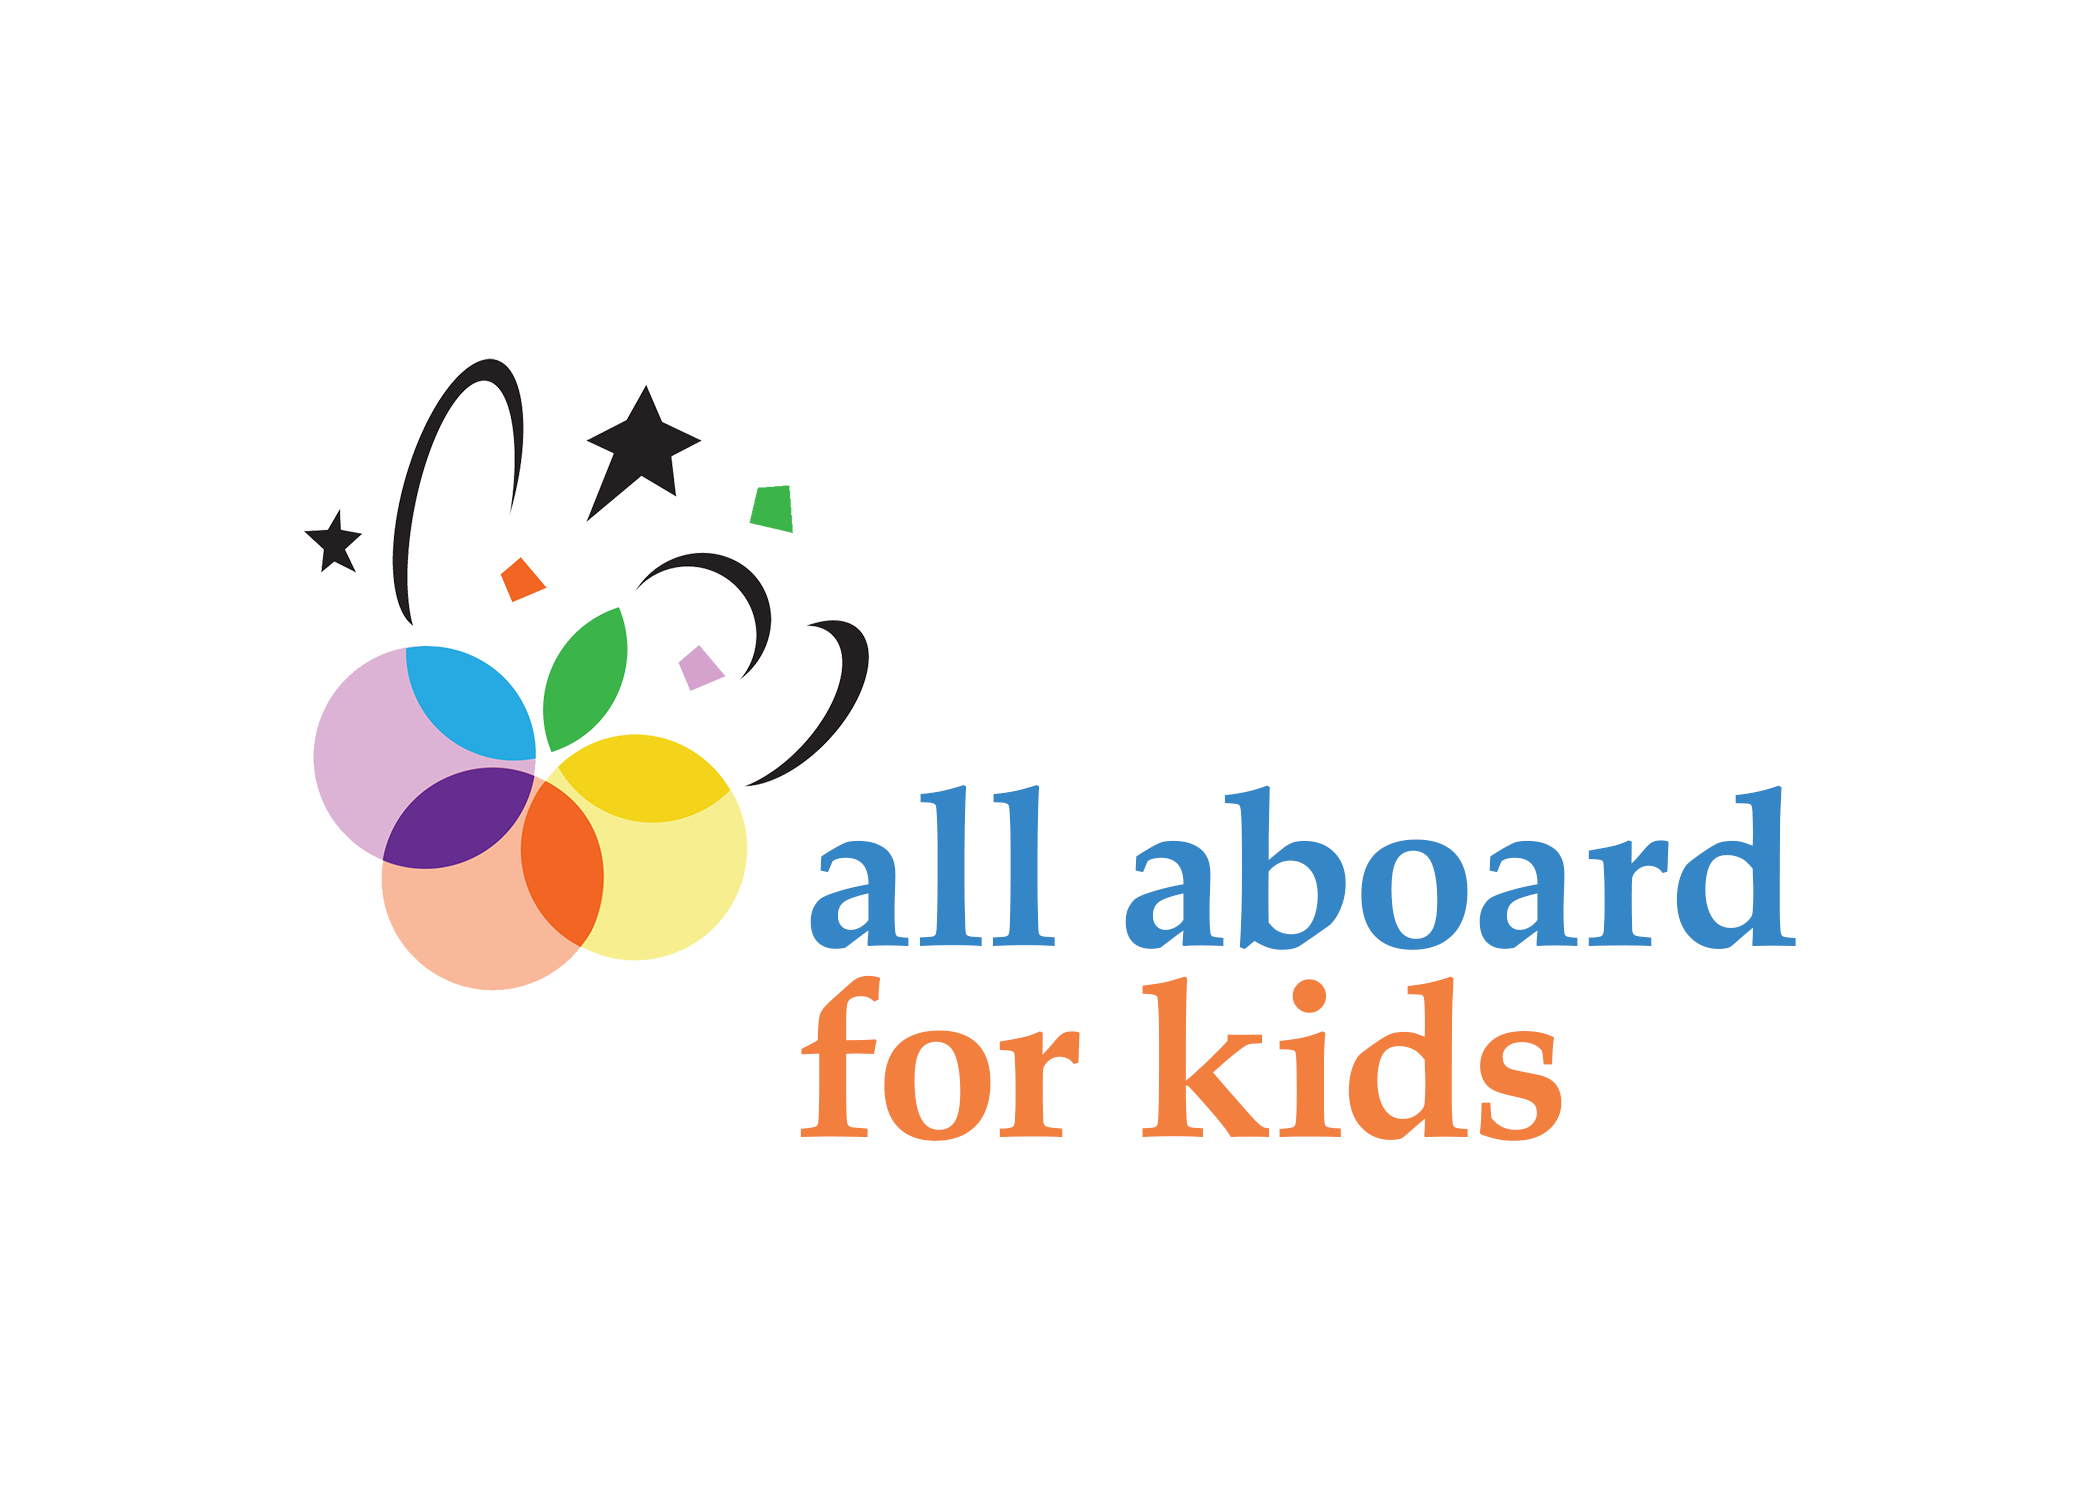 All Aboard for Kids